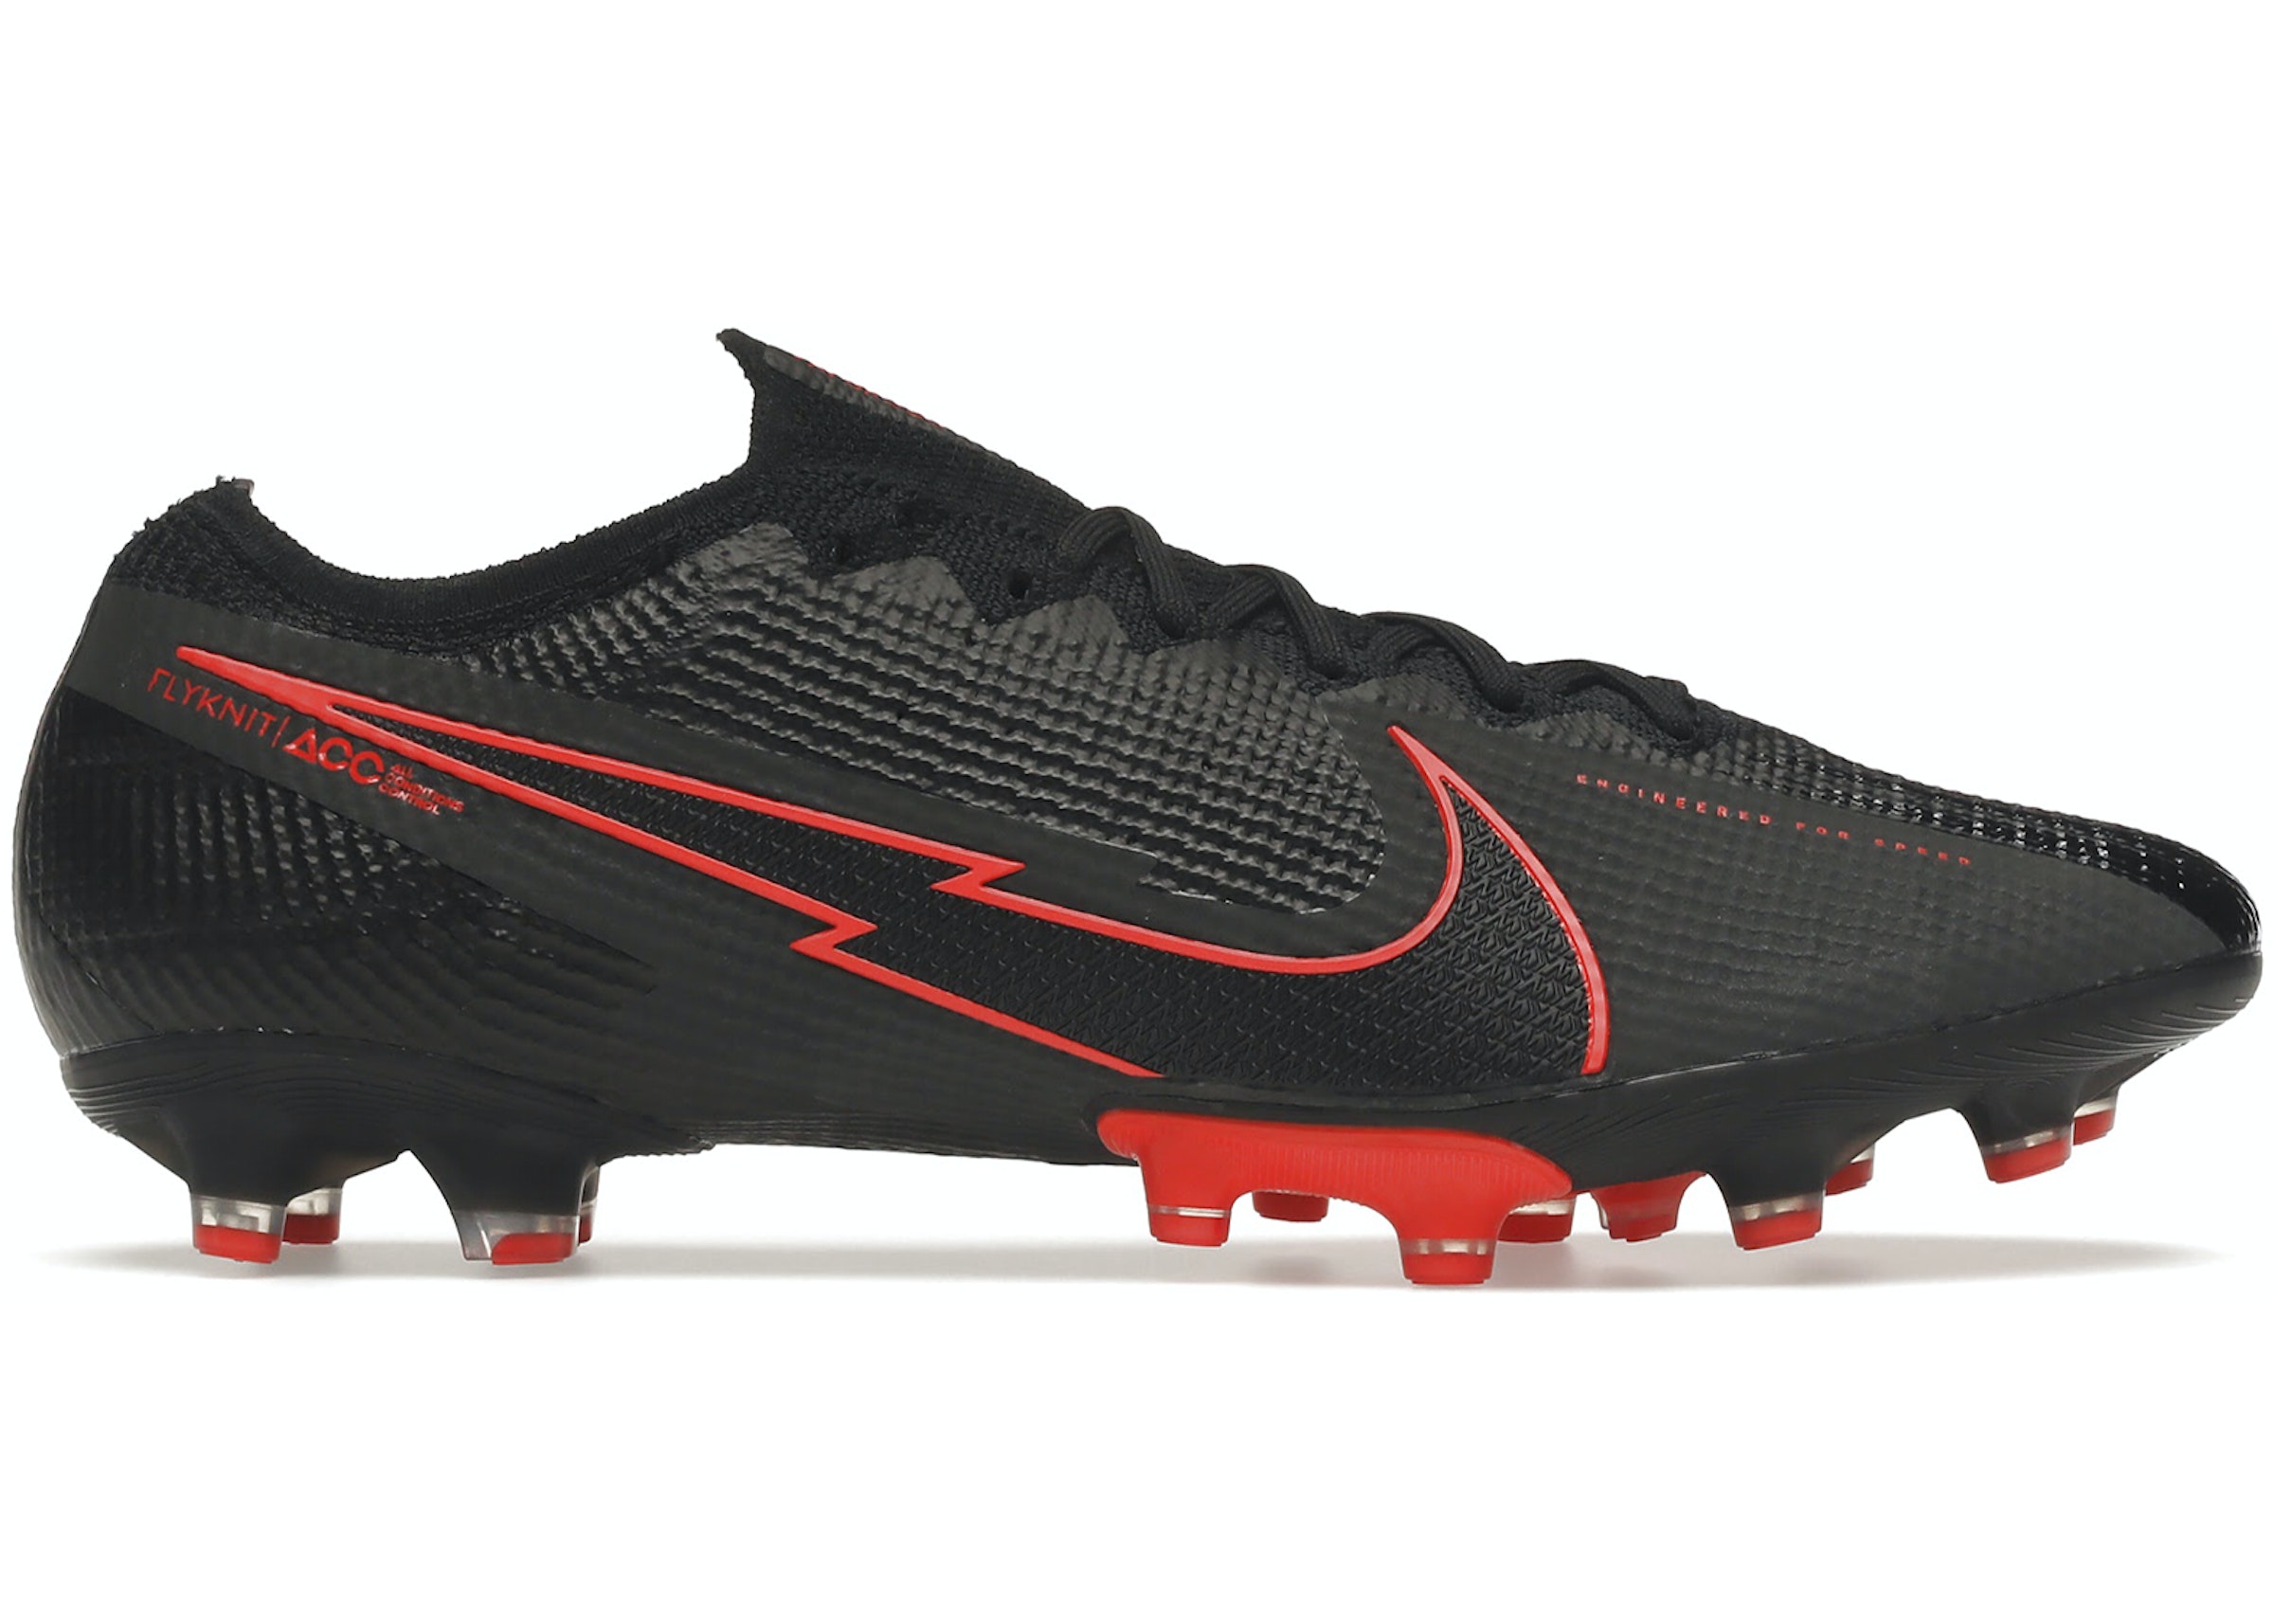 Ciego acoso clase Nike Mercurial Vapor 13 Elite AG Pro Chile Red Black Pack Men's -  AT7895-060 - US